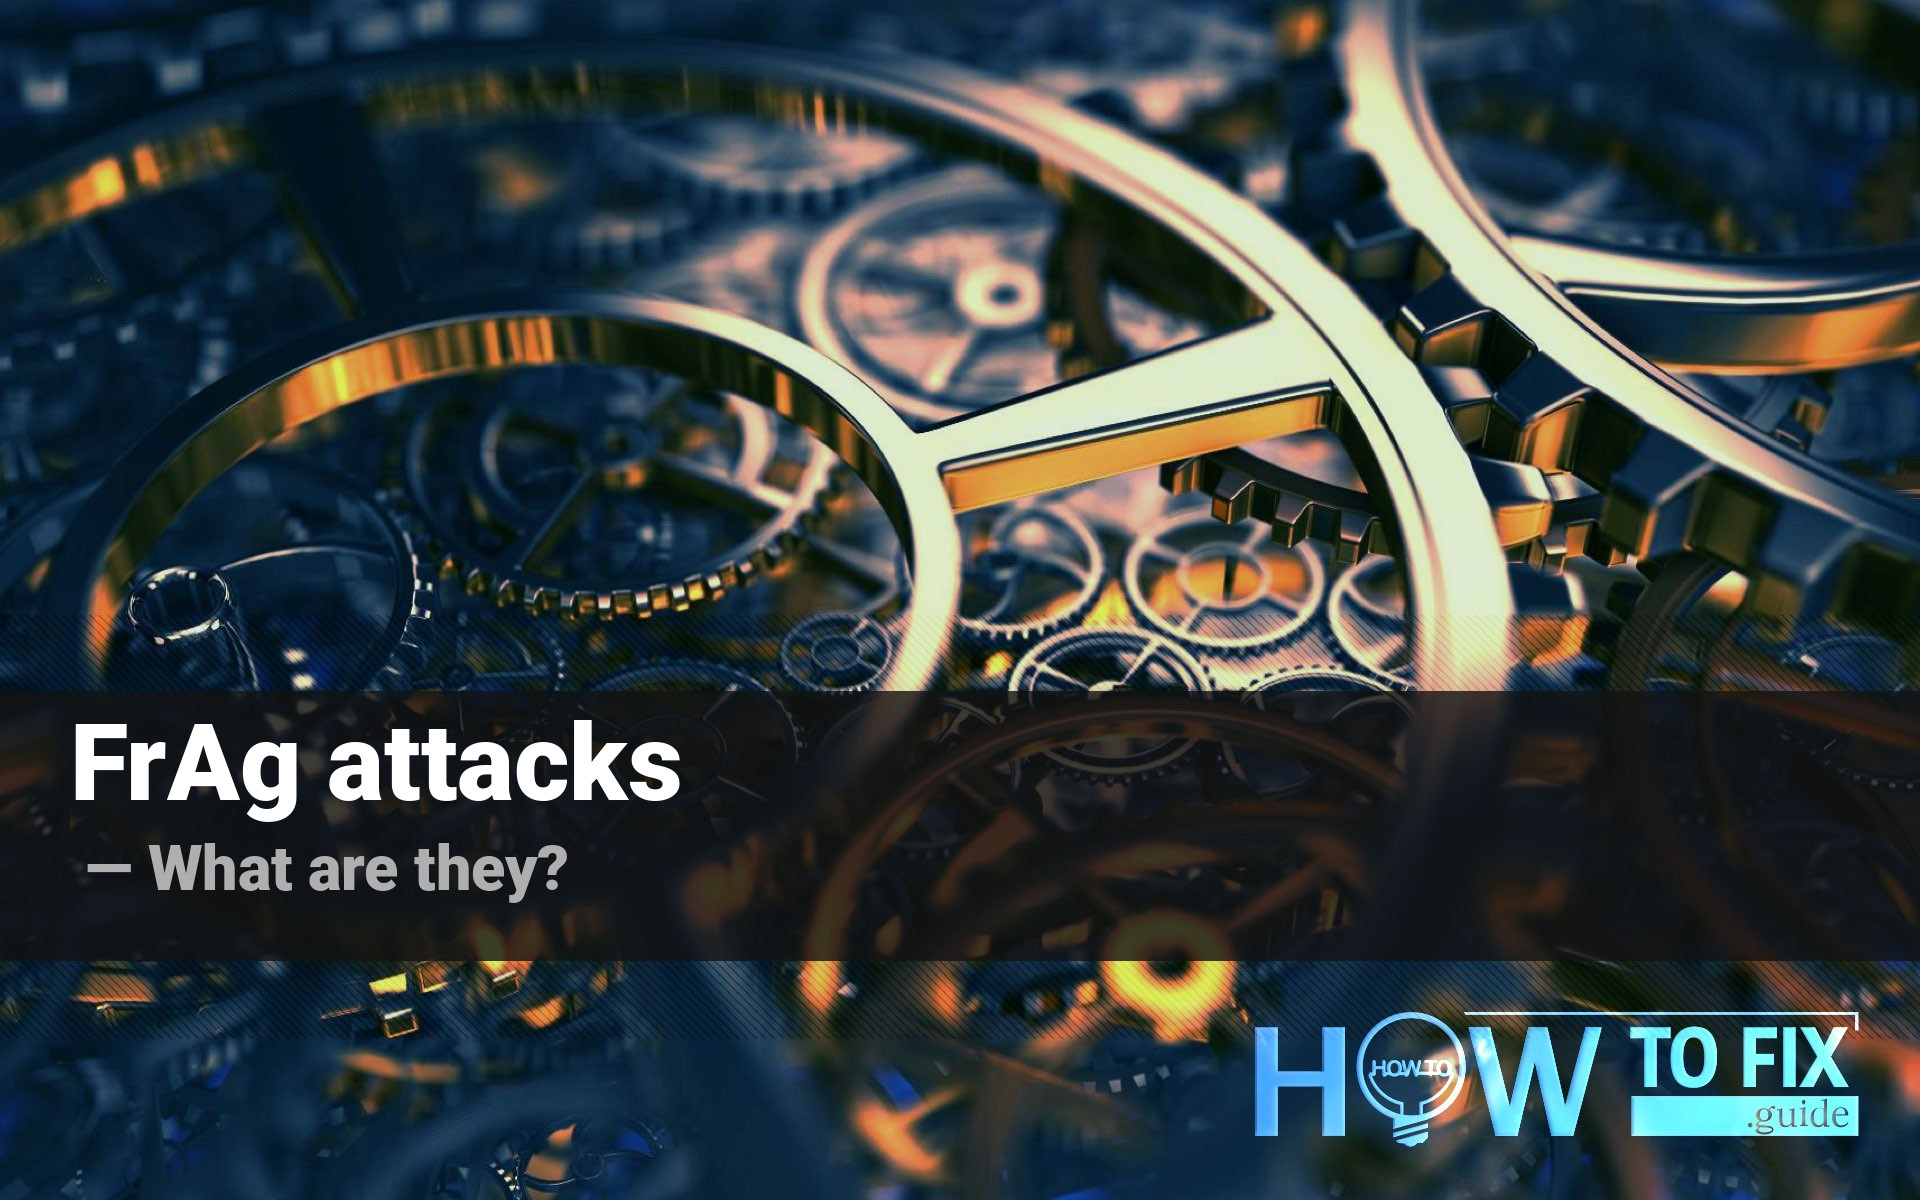 FragAttacks. How to keep your Wi-Fi network secure?